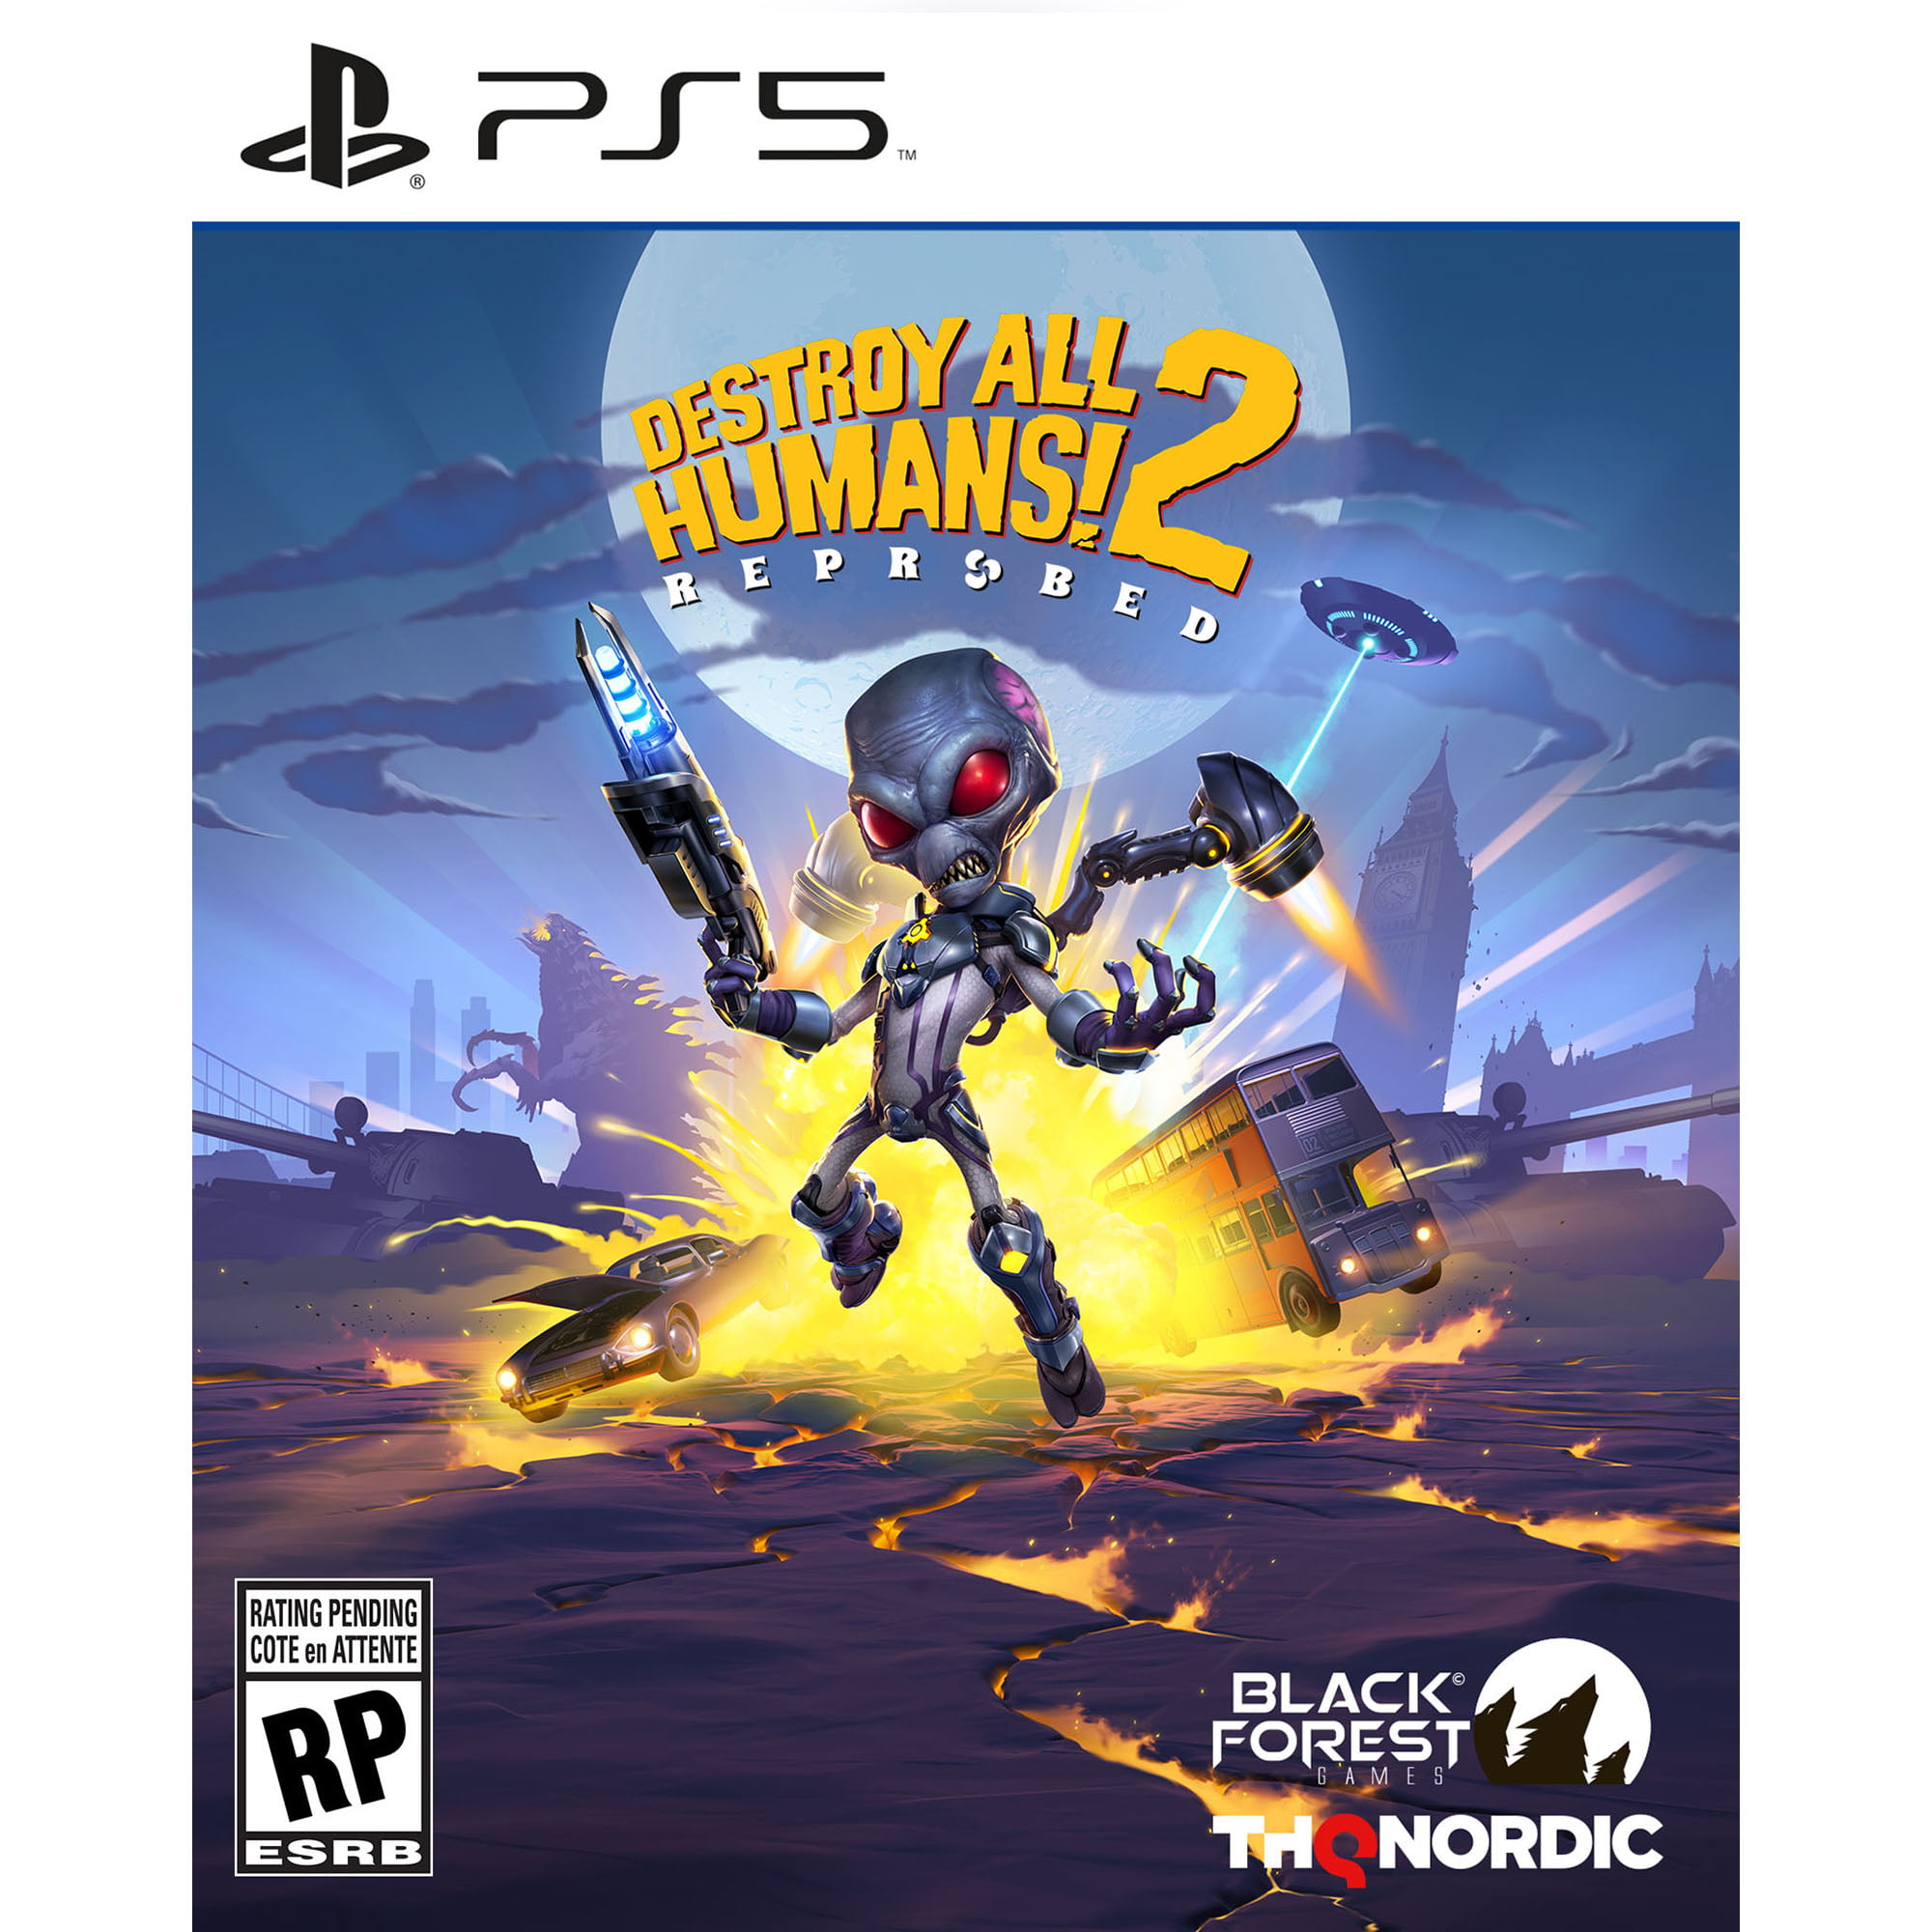 Destroy All Humans! 2: Reprobed Video Game (PlayStation 5) $20 + Free Shipping w/ Walmart+ or on $35+ $19.97